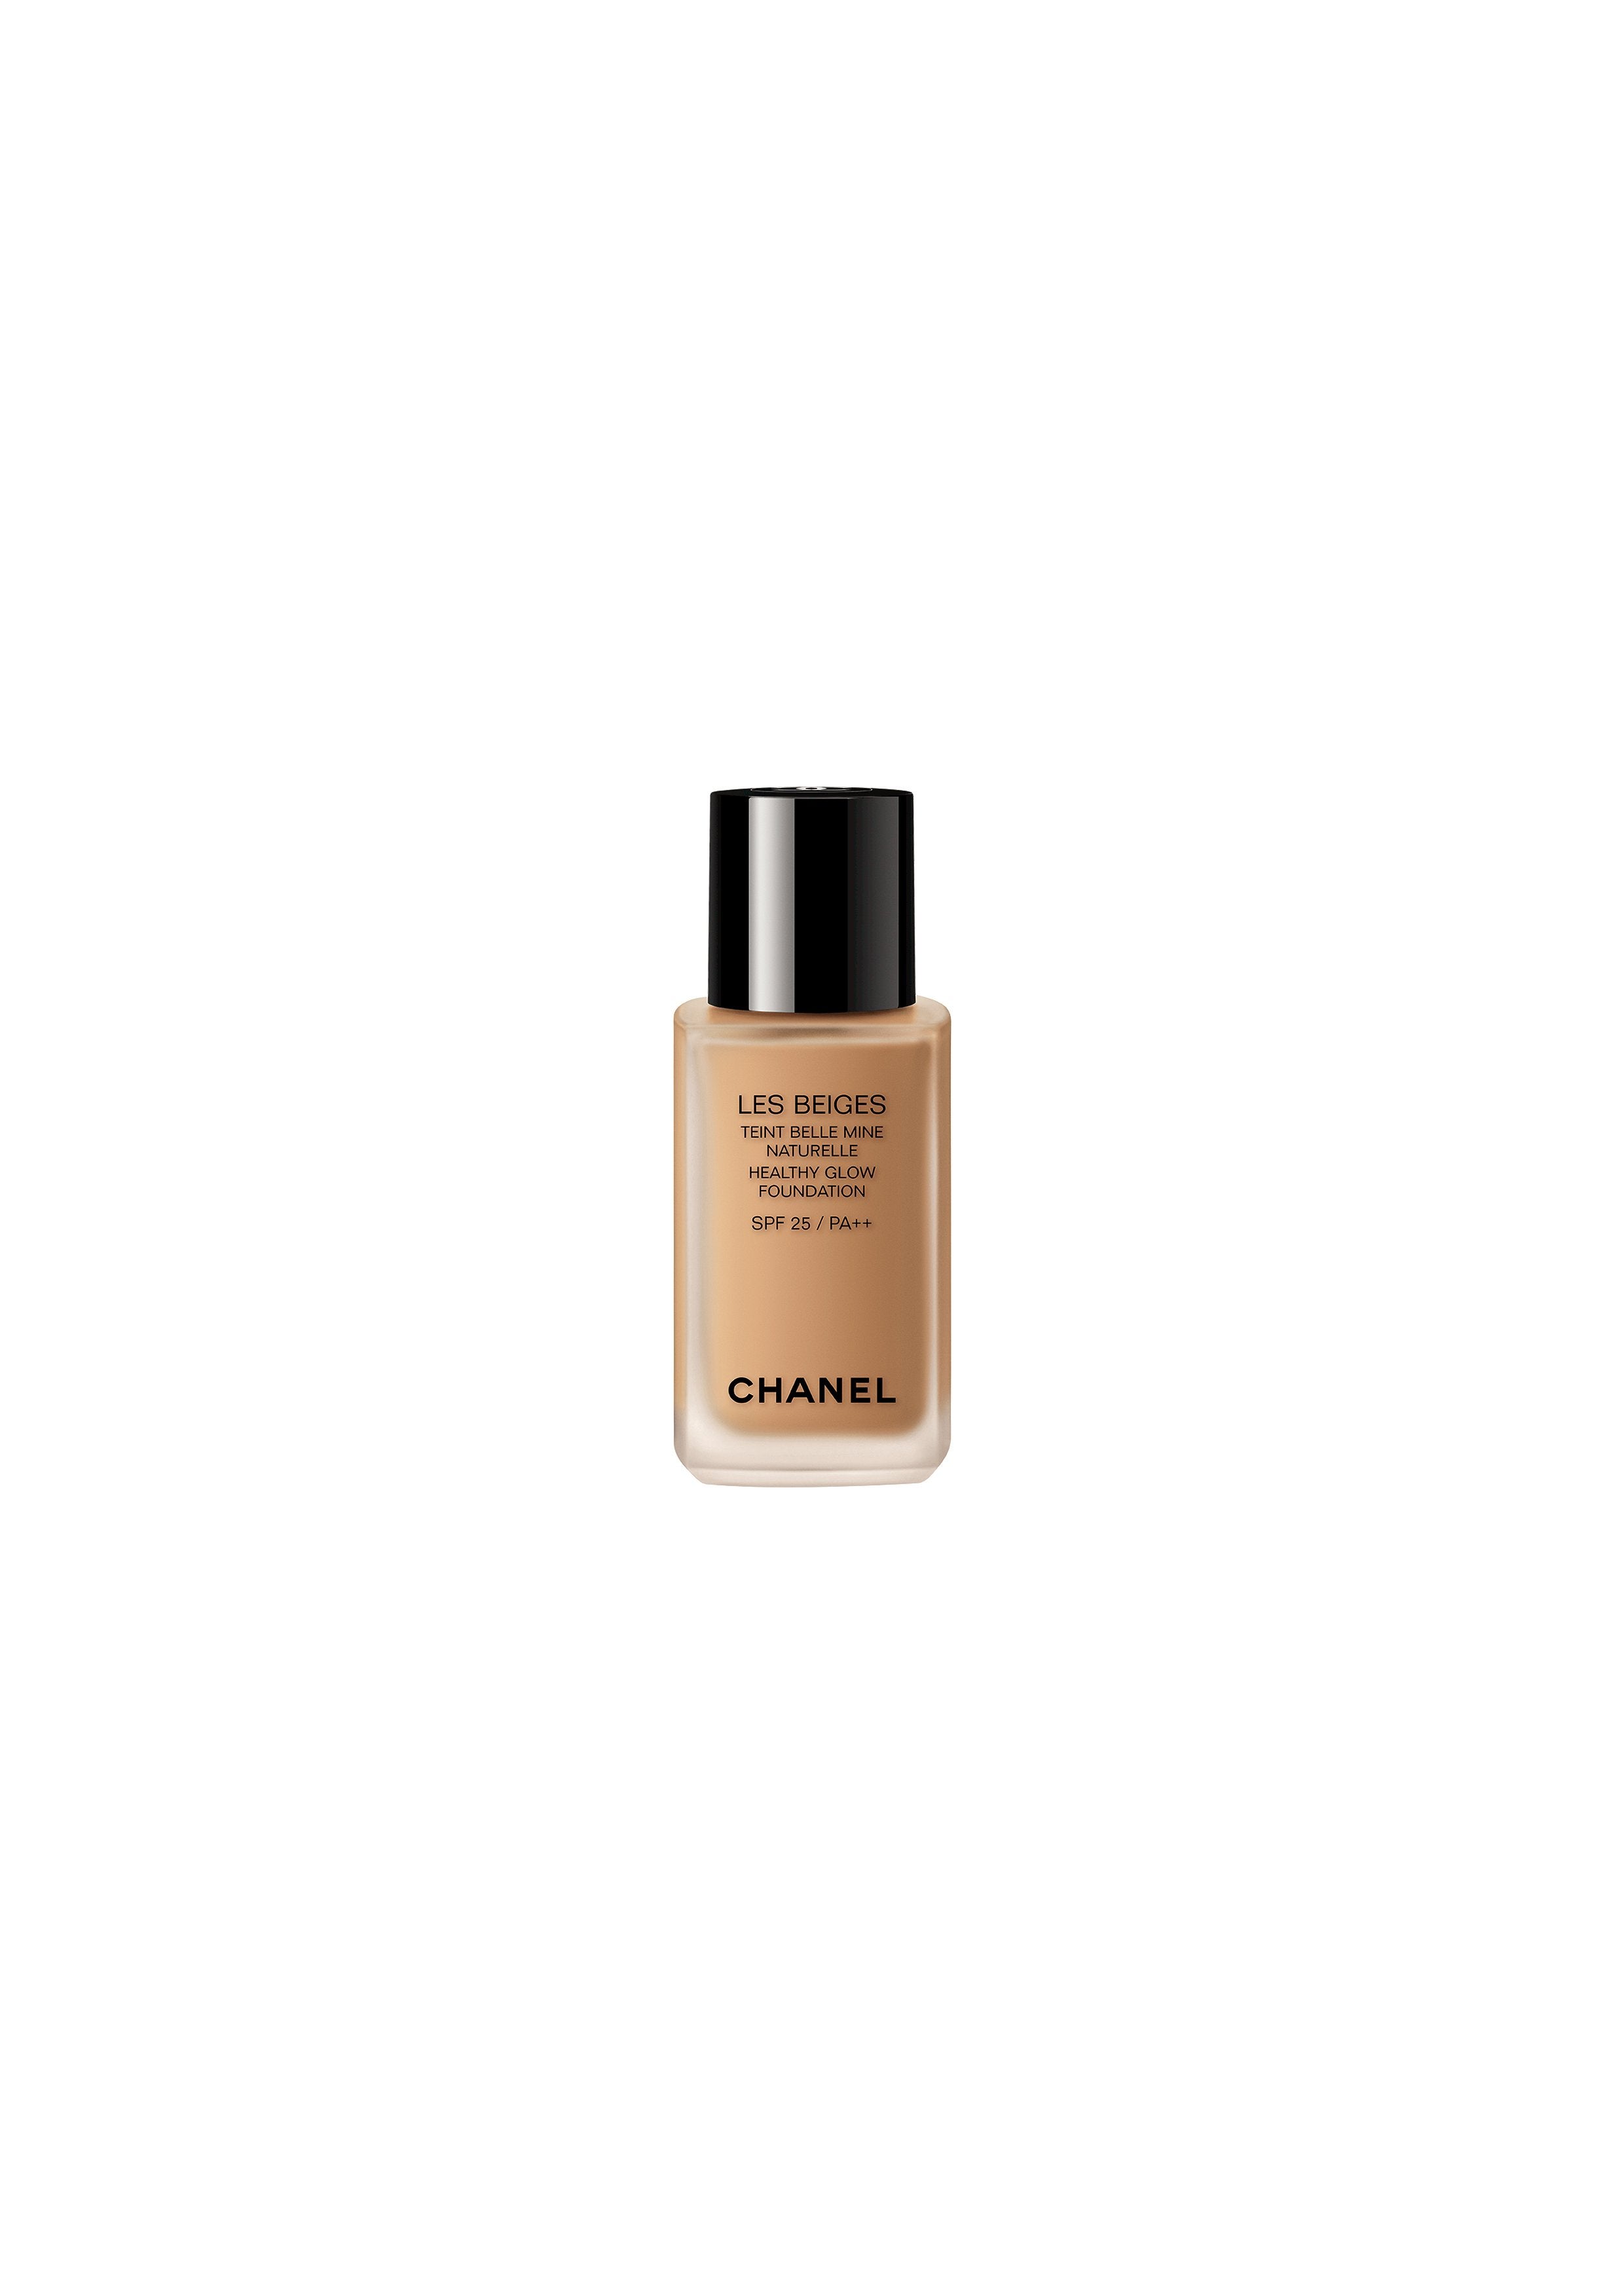 Chanel Les Beiges Healthy Glow Foundation SPF 25